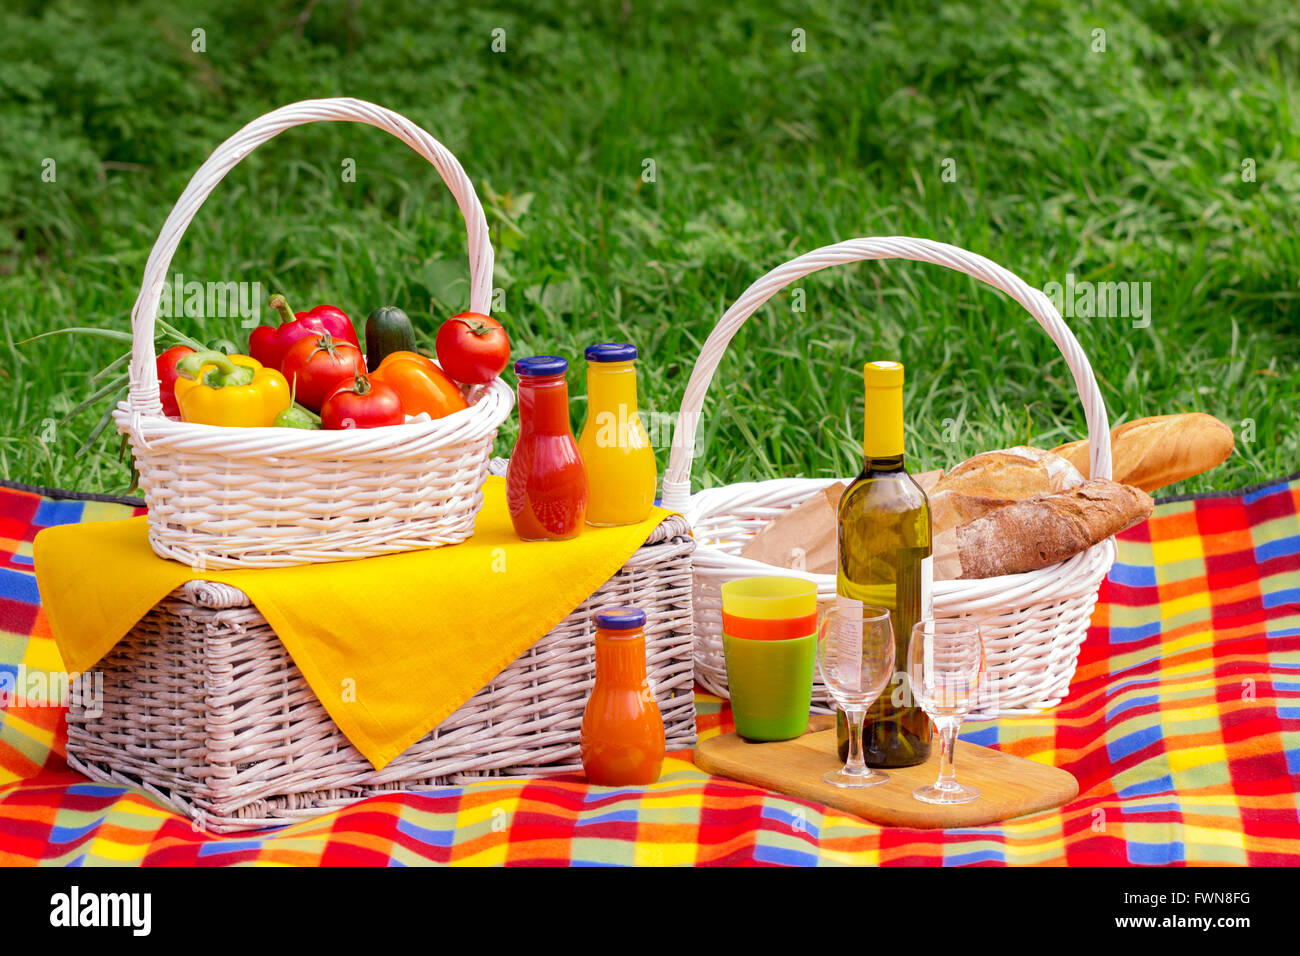 Picnic on the grass. Picnic basket with vegetables and bread. A bottle of wine with glasses and bottles of juice. Stock Photo